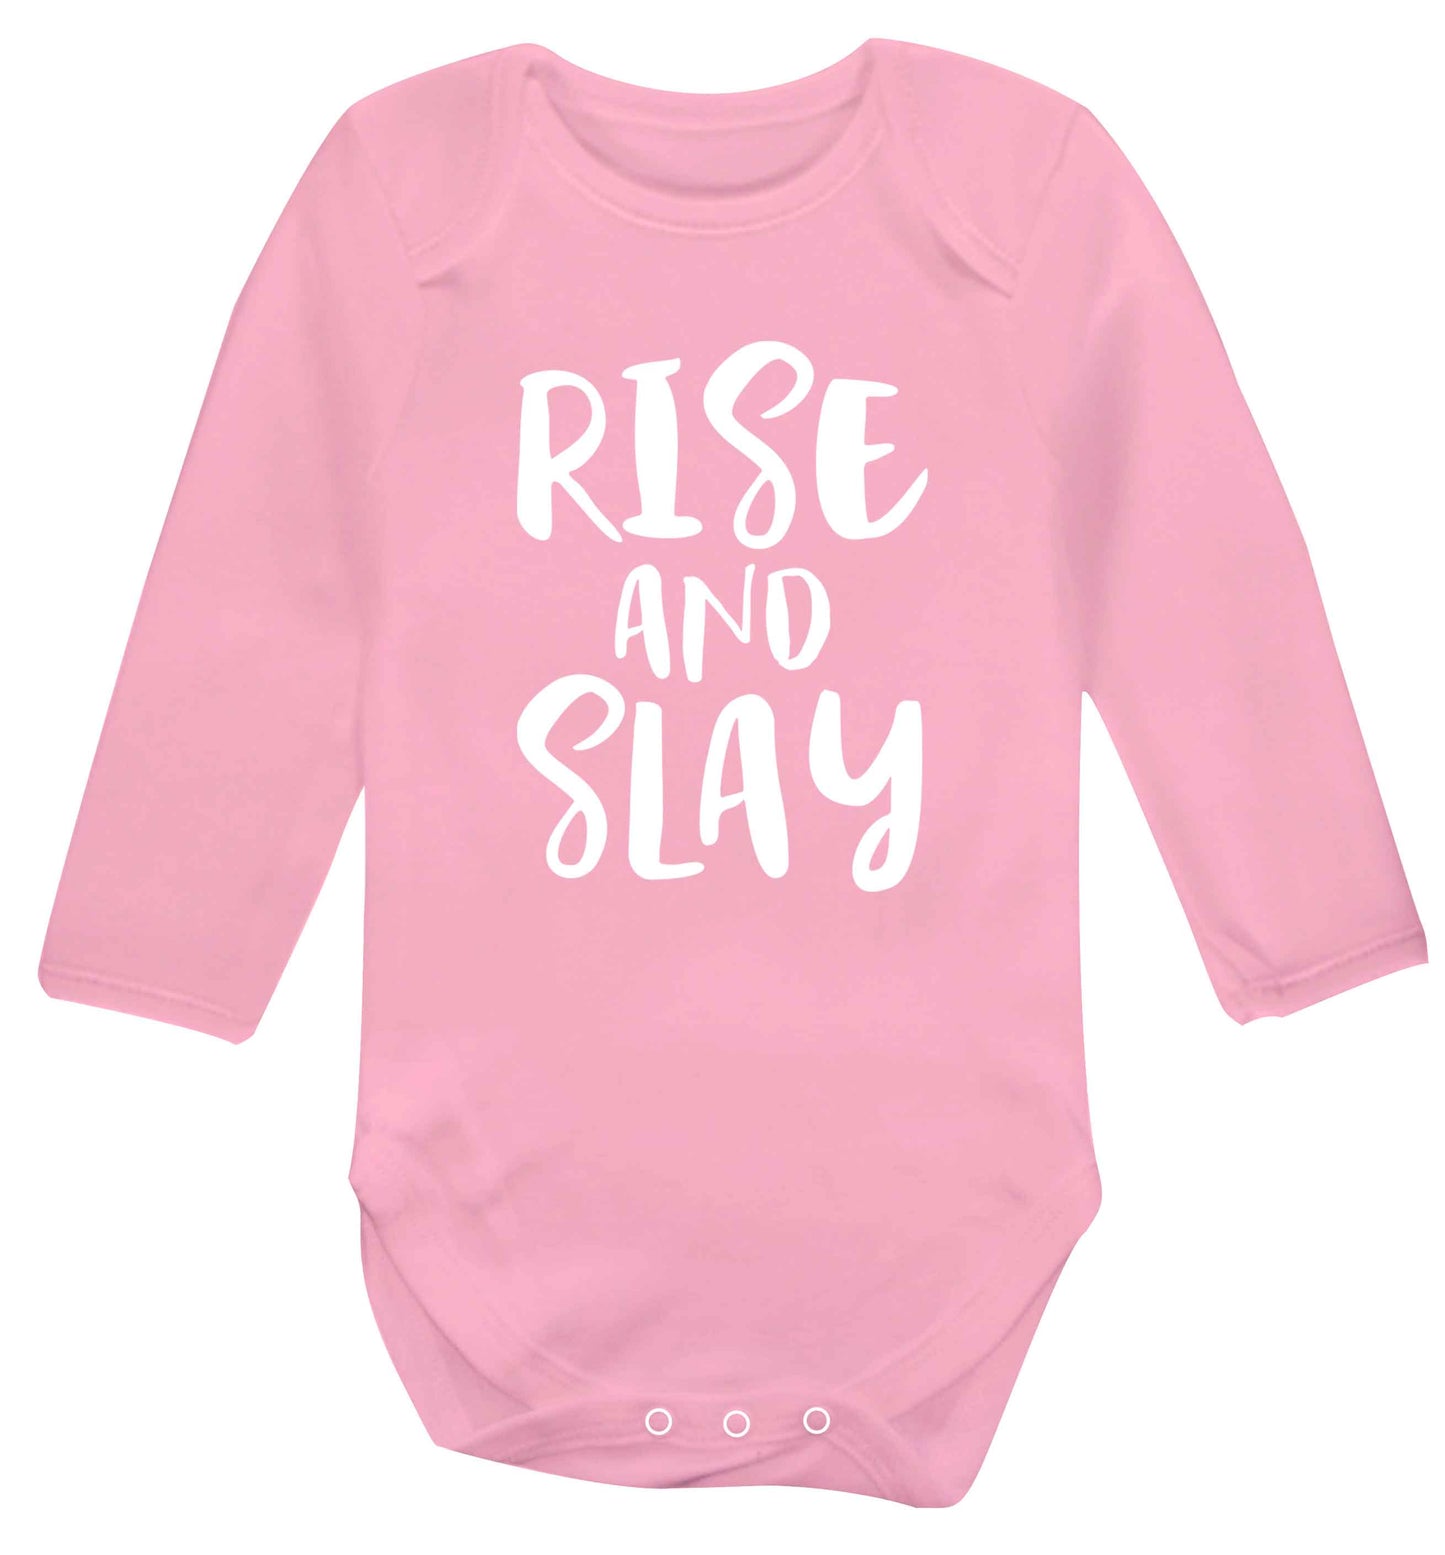 Rise and slay Baby Vest long sleeved pale pink 6-12 months